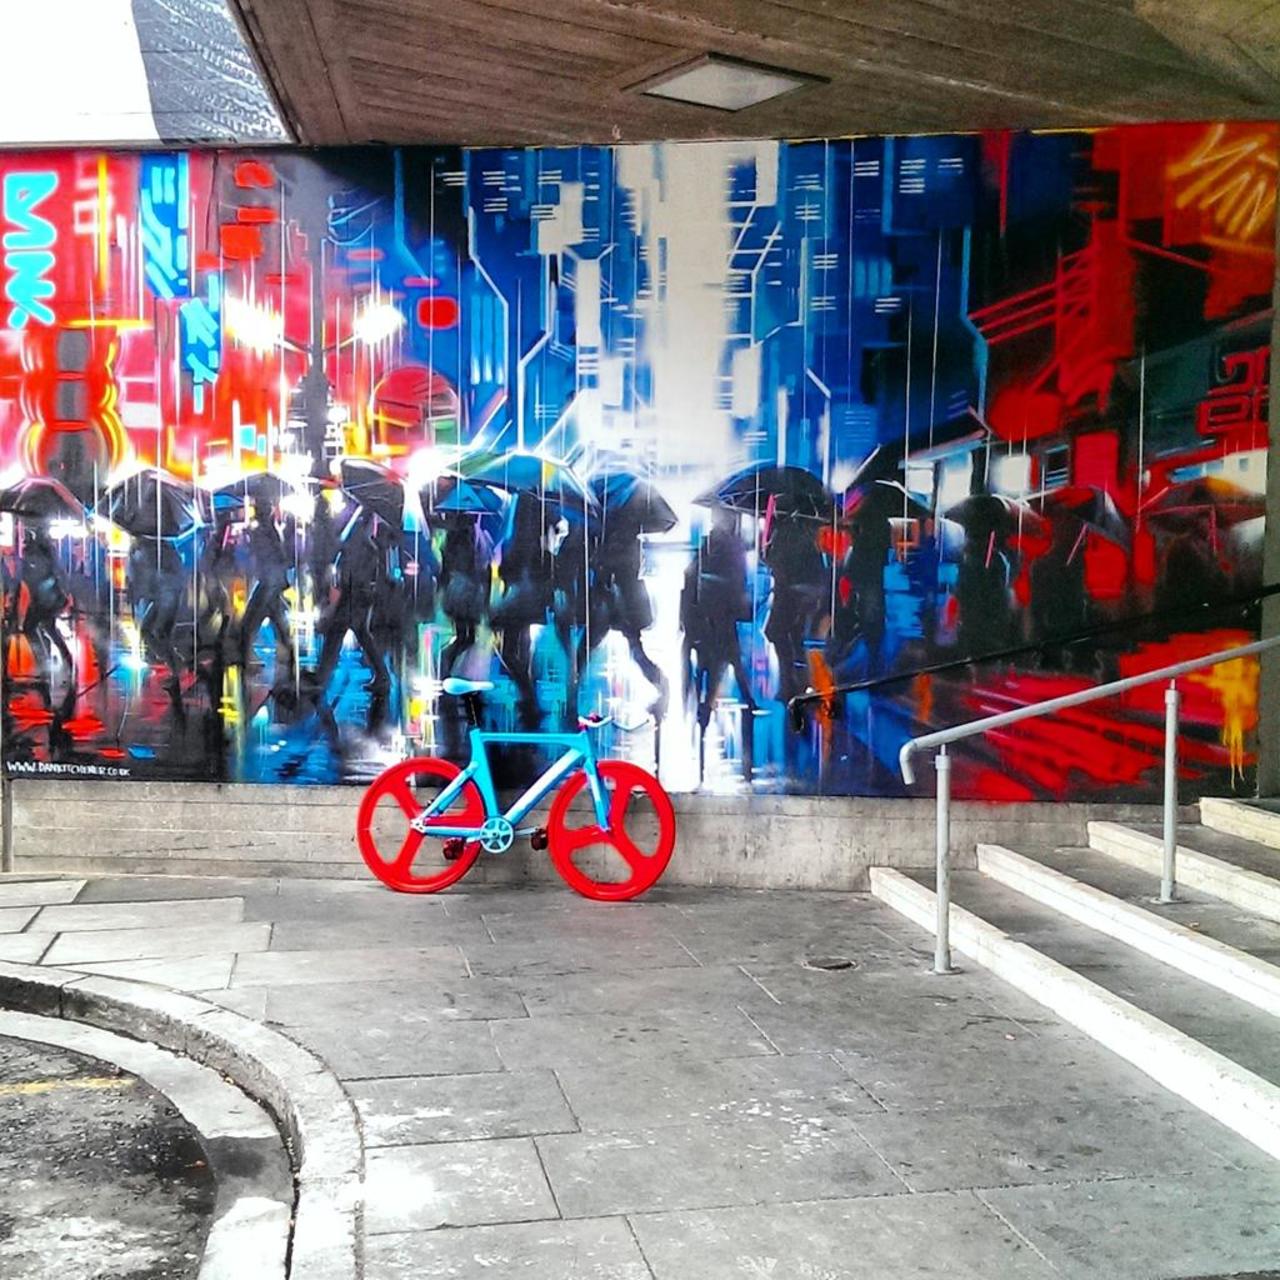 “@skydweller0: Art by @DanKitchener #graffiti #art #streetart #fixie http://t.co/fCbeve51ba” stunning as usual. Where is this?